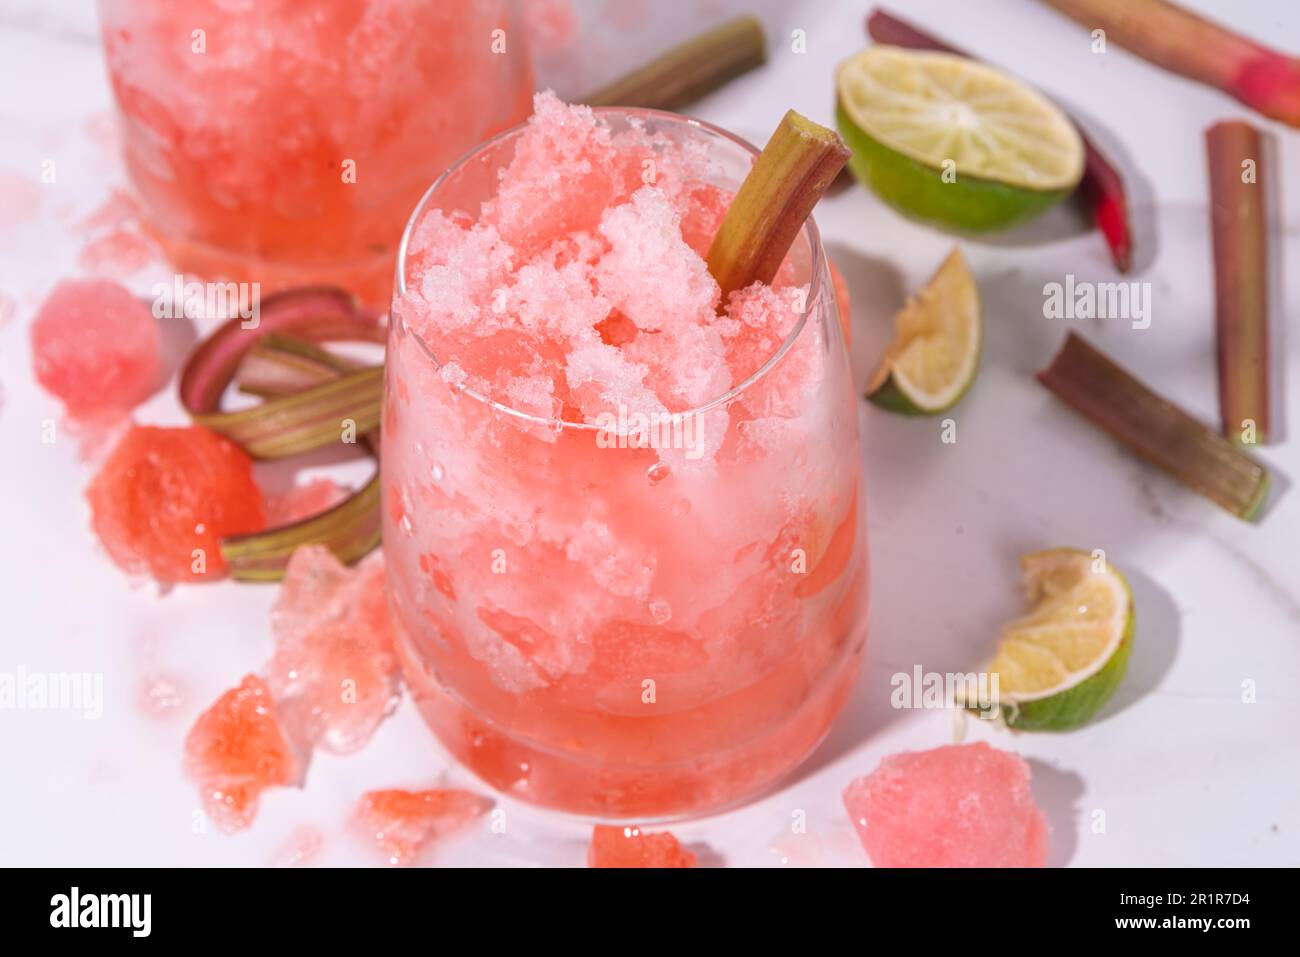 https://c8.alamy.com/comp/2R1R7D4/refreshing-summer-rhubarb-sour-fizz-cocktail-frozen-fizz-cocktail-sweet-rhubarb-slushy-with-sirup-rum-and-champagne-refreshing-cold-and-healthy-s-2R1R7D4.jpg